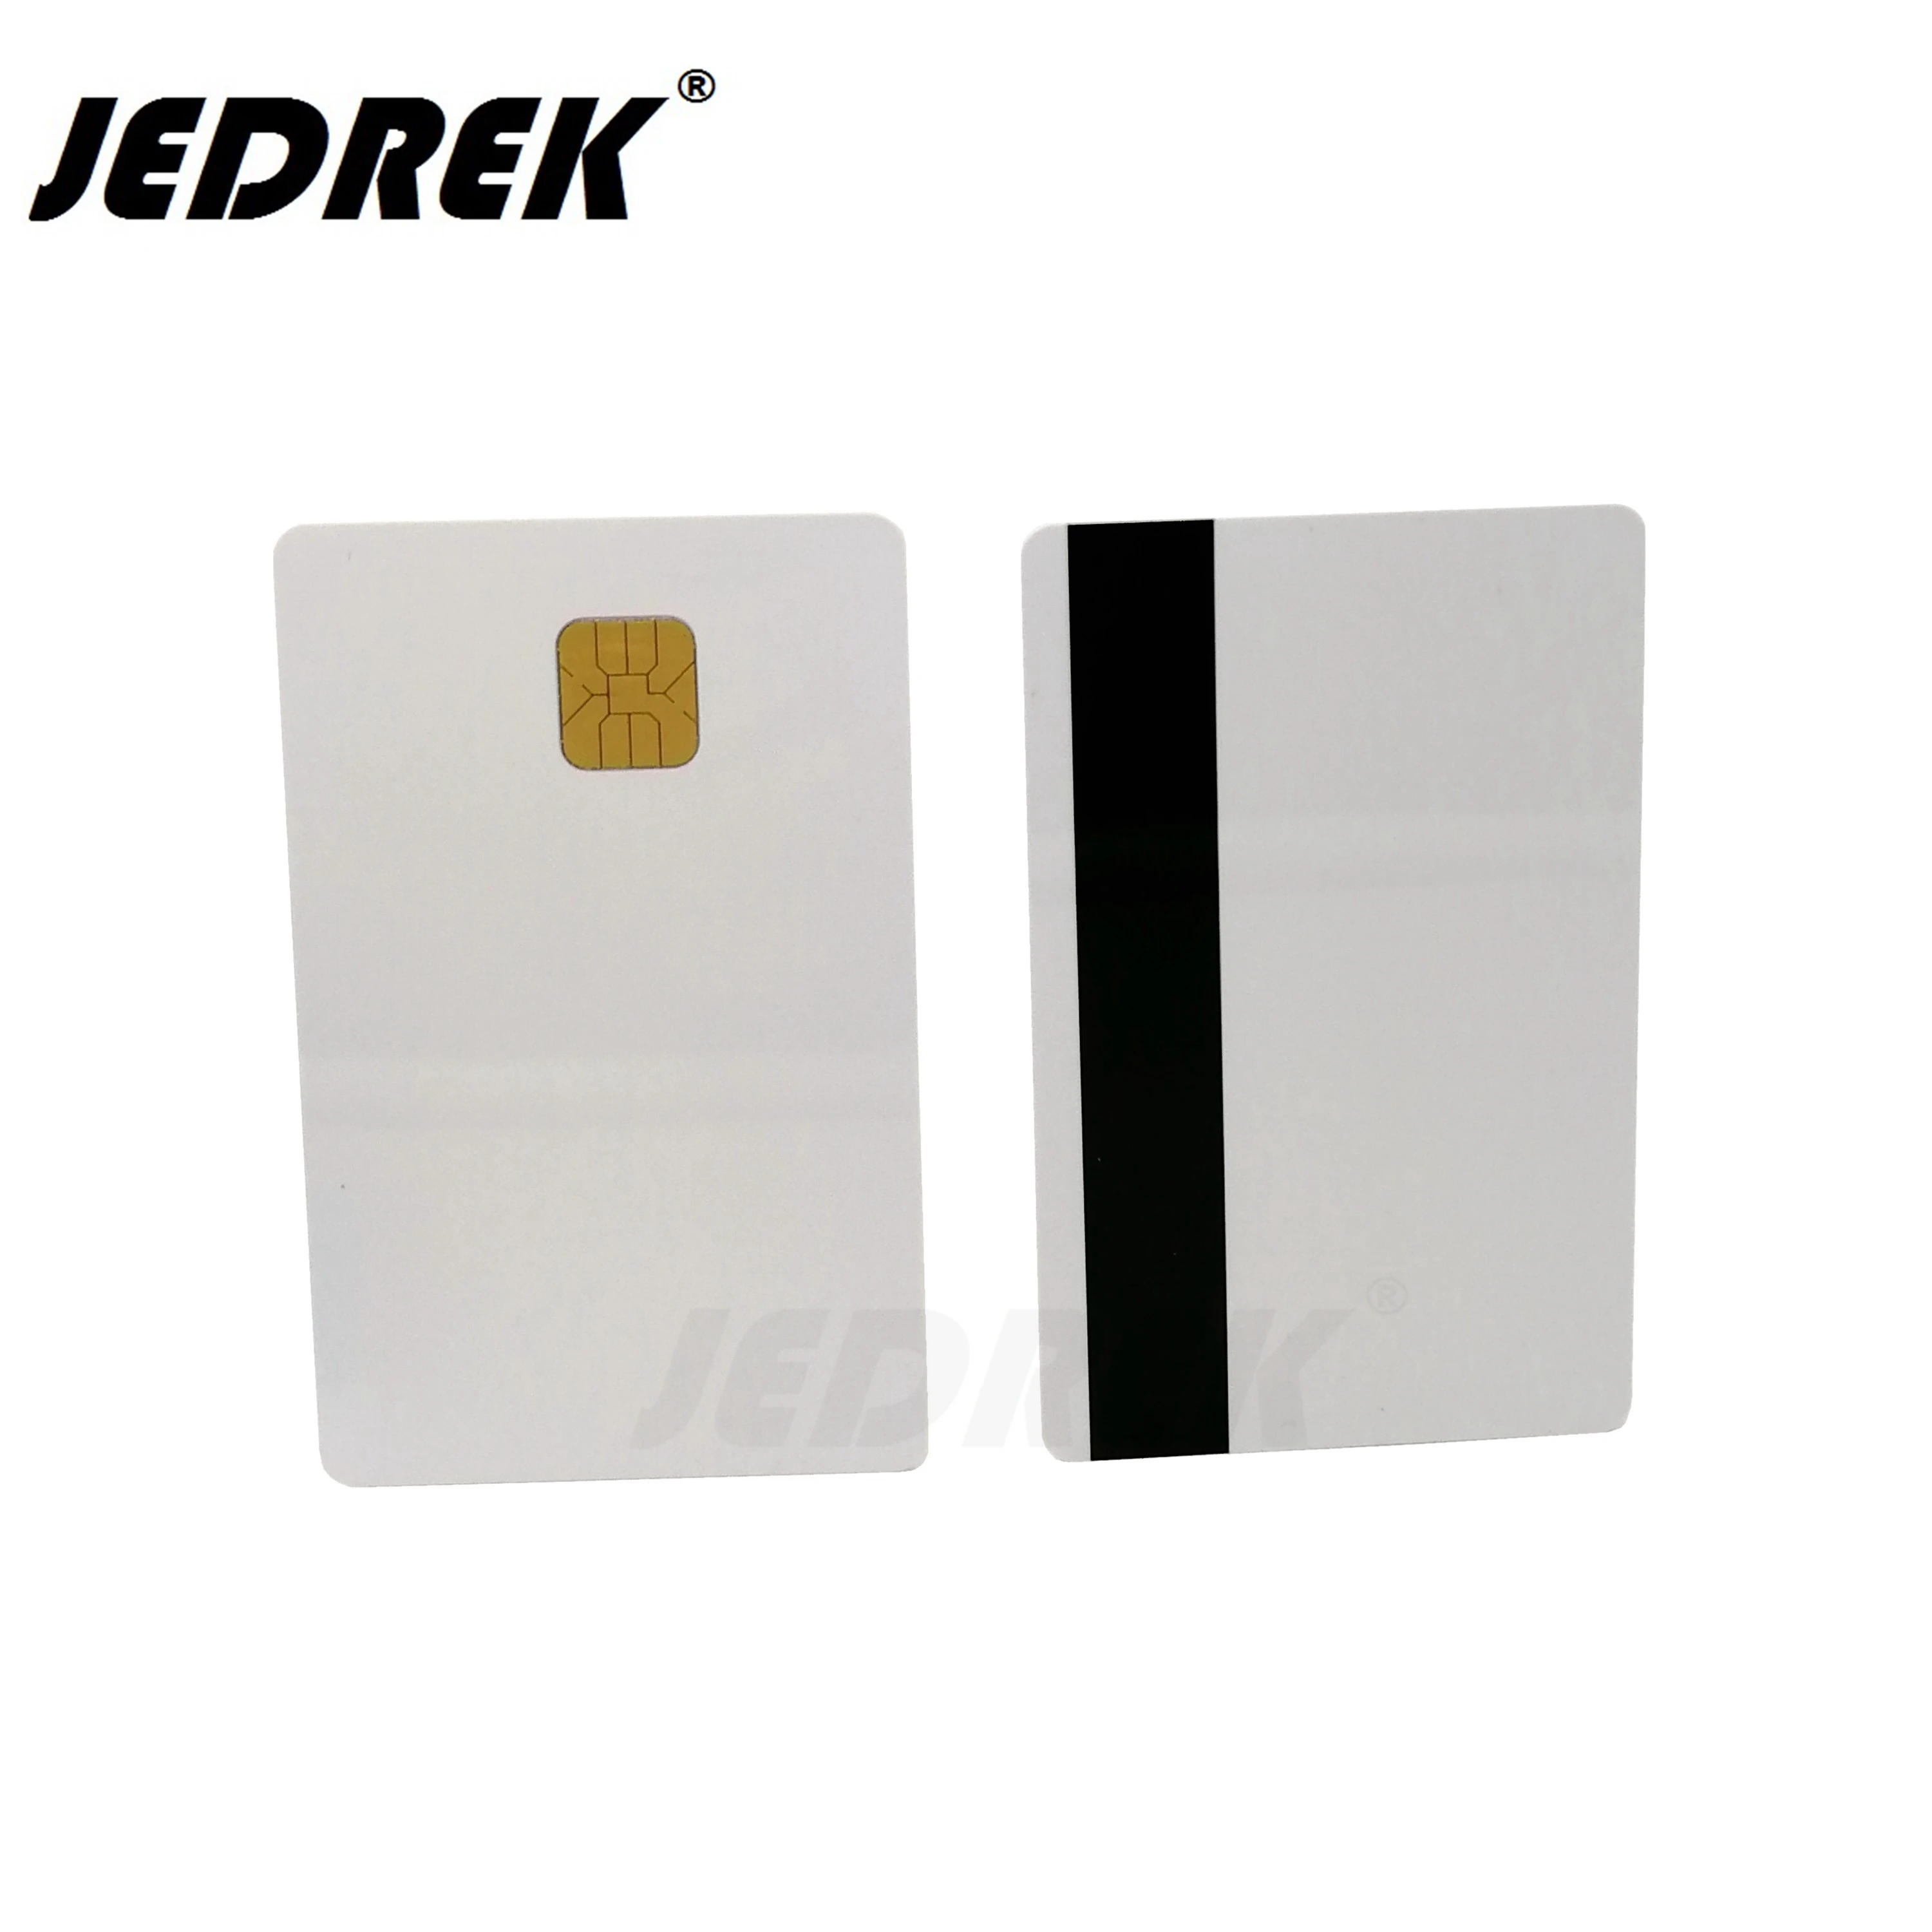 10PCS SLE 4428 Chip With Hico Magnetic Stripe Contact IC Smart Card White  Blank PVC card